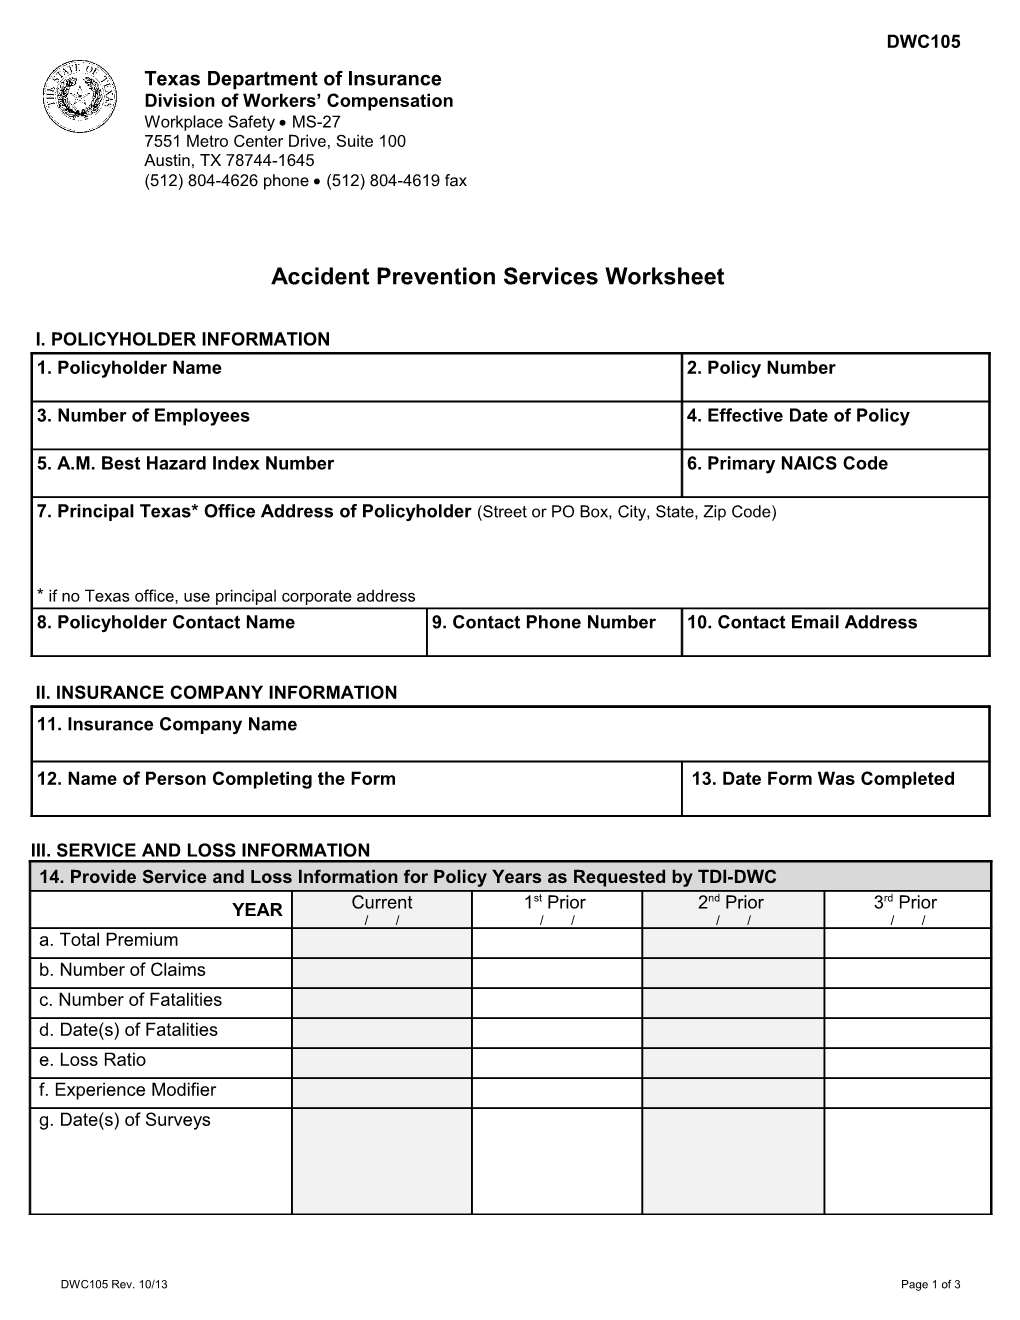 Accident Prevention Services Worksheet